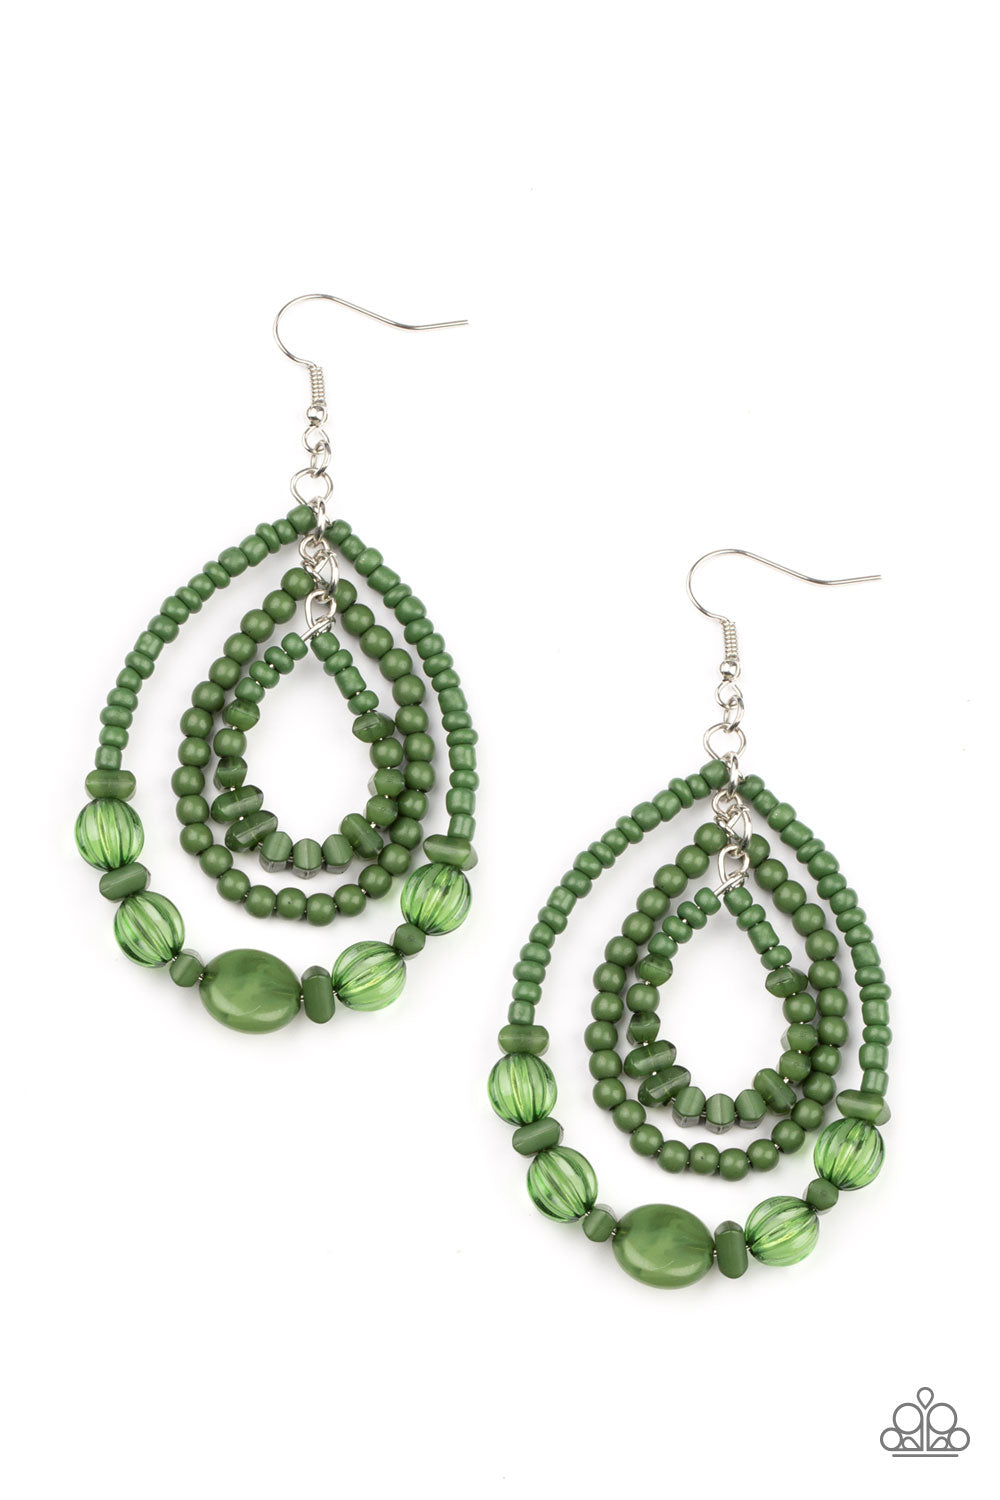 Prana Party Green Earring - Paparazzi Accessories  Varying in size and shape, mismatched green stone, seed bead, crystal-like, and faux stone beads are threaded along three dainty wires that connect into a colorful teardrop lure. Earring attaches to a standard fishhook fitting.  Sold as one pair of earrings.